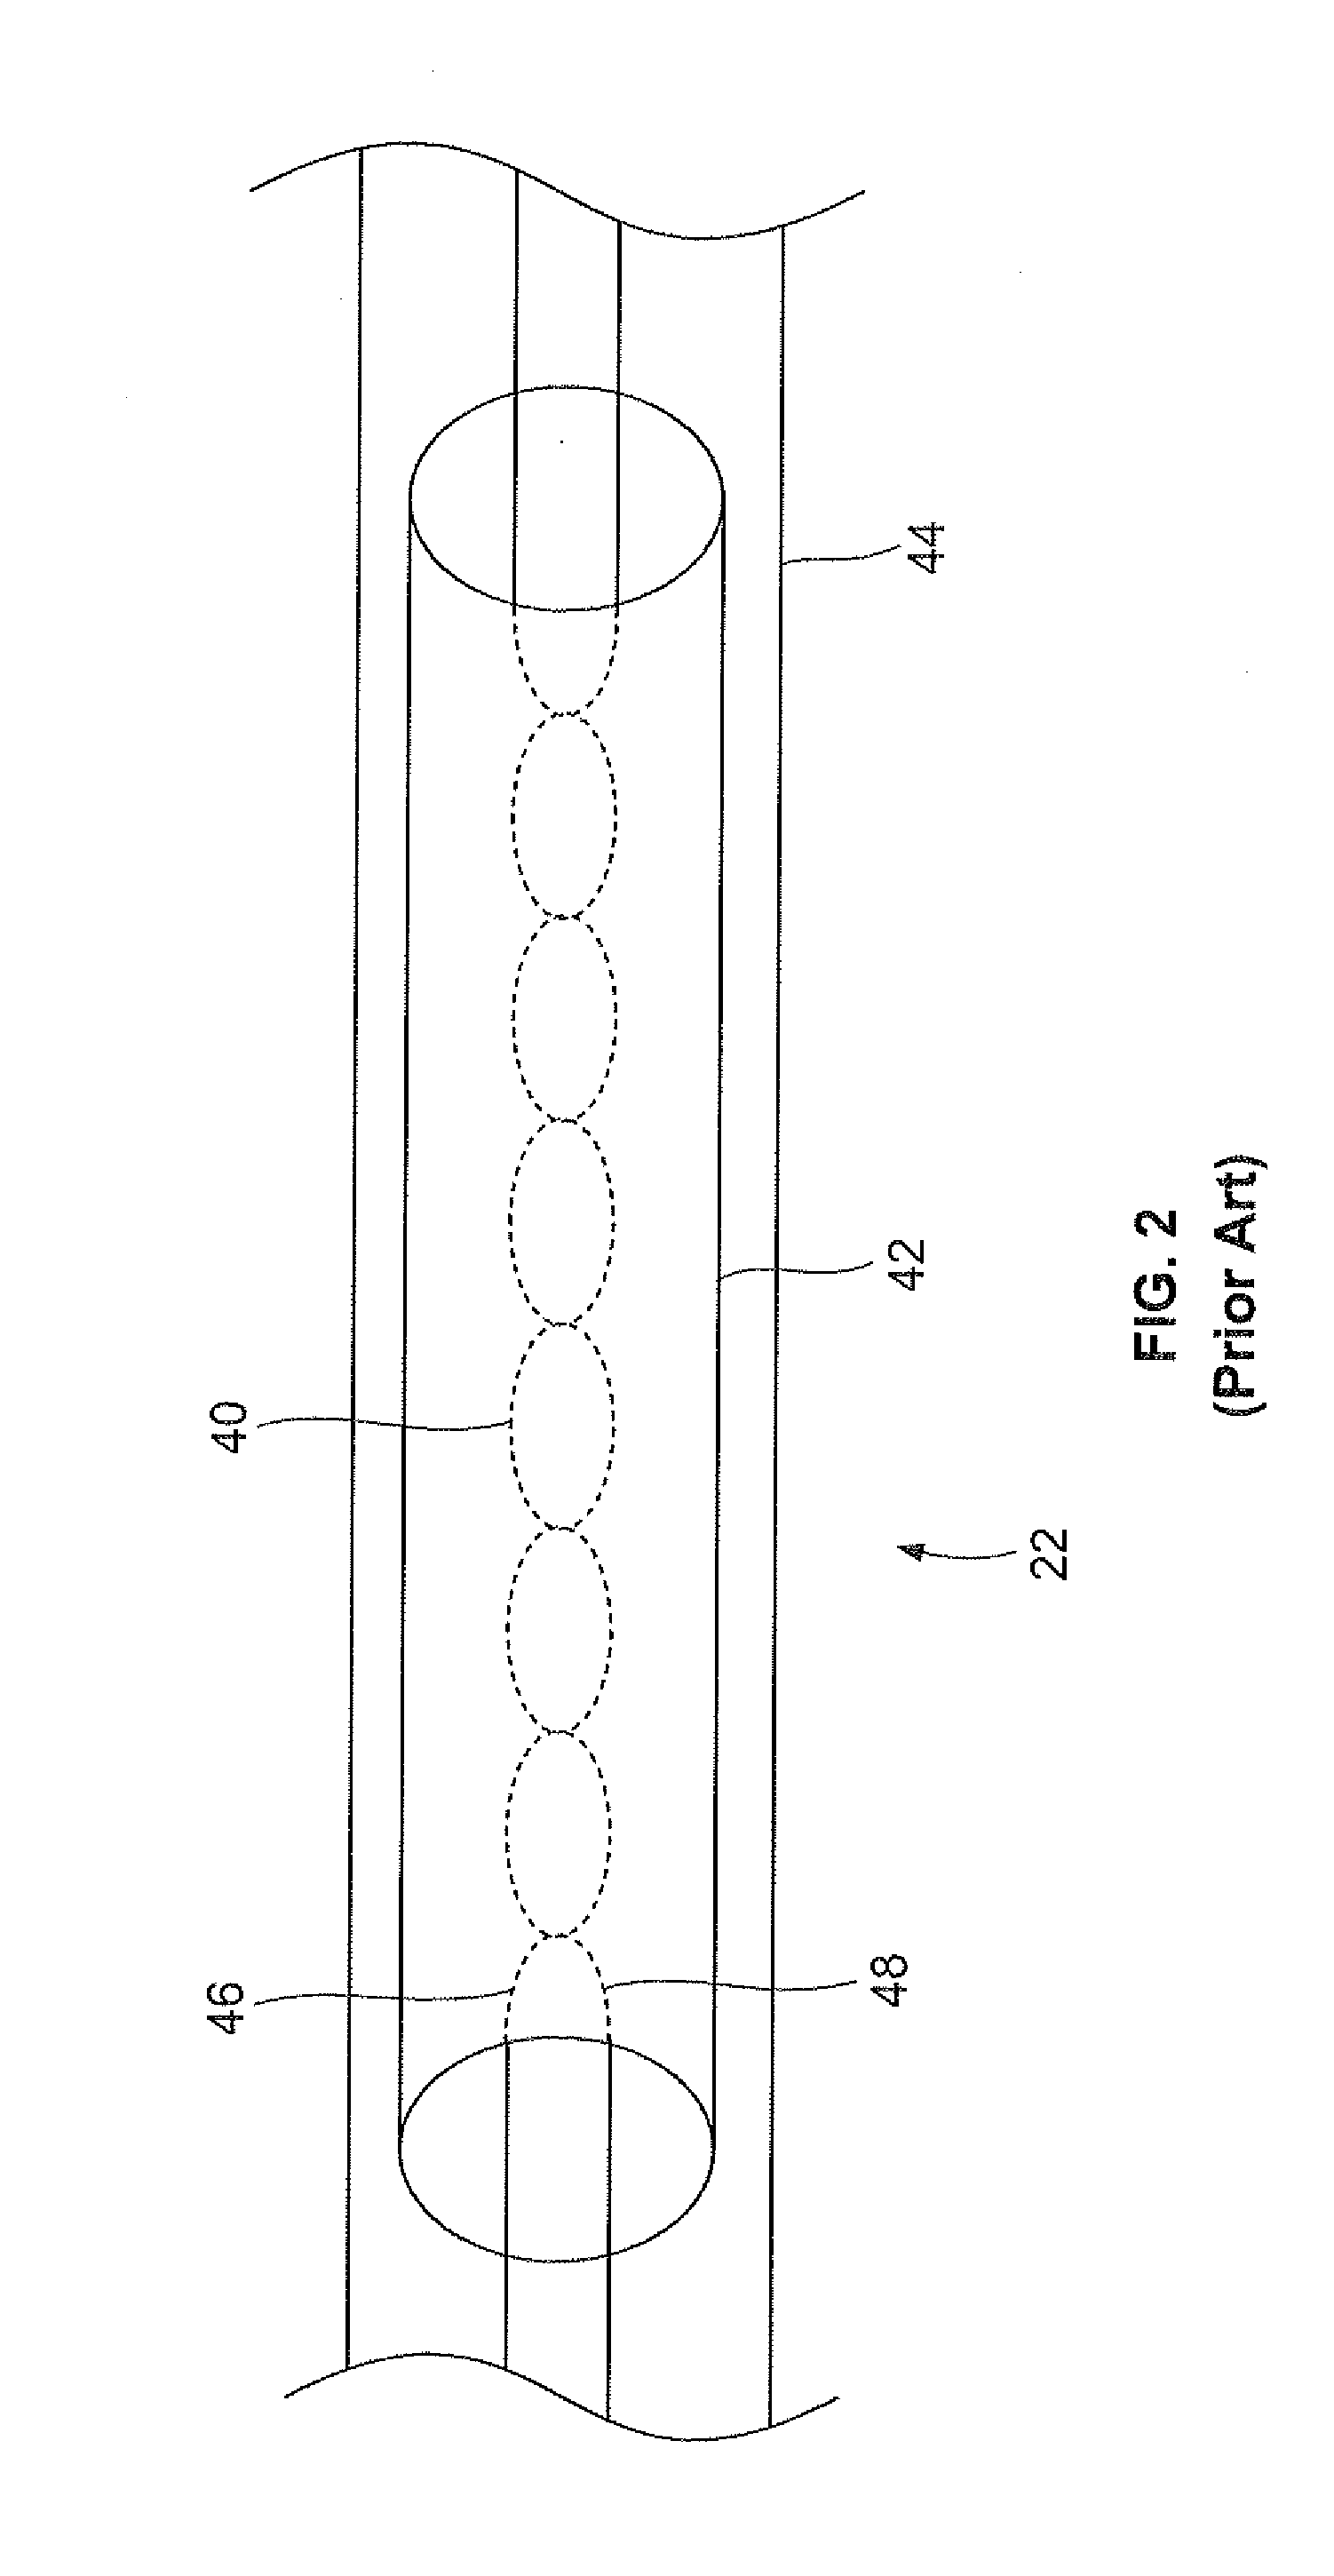 Method for performing a shield integrity test and for isolating trouble in the shield using graphical analysis